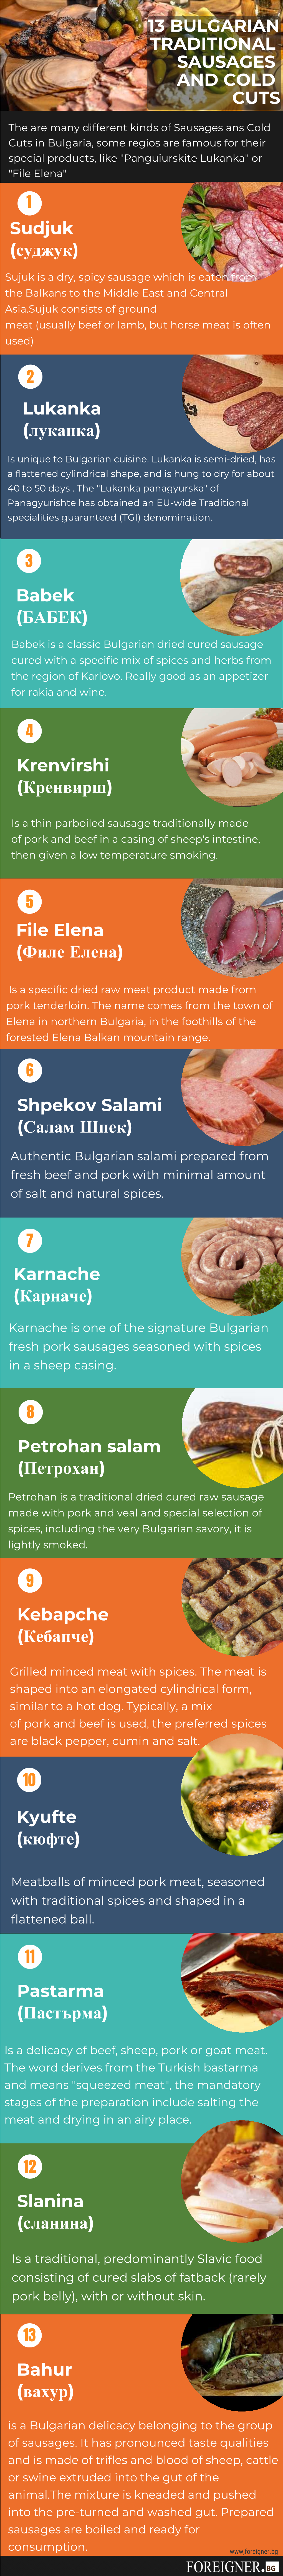 Bulgarian -Sausages Could Cuts